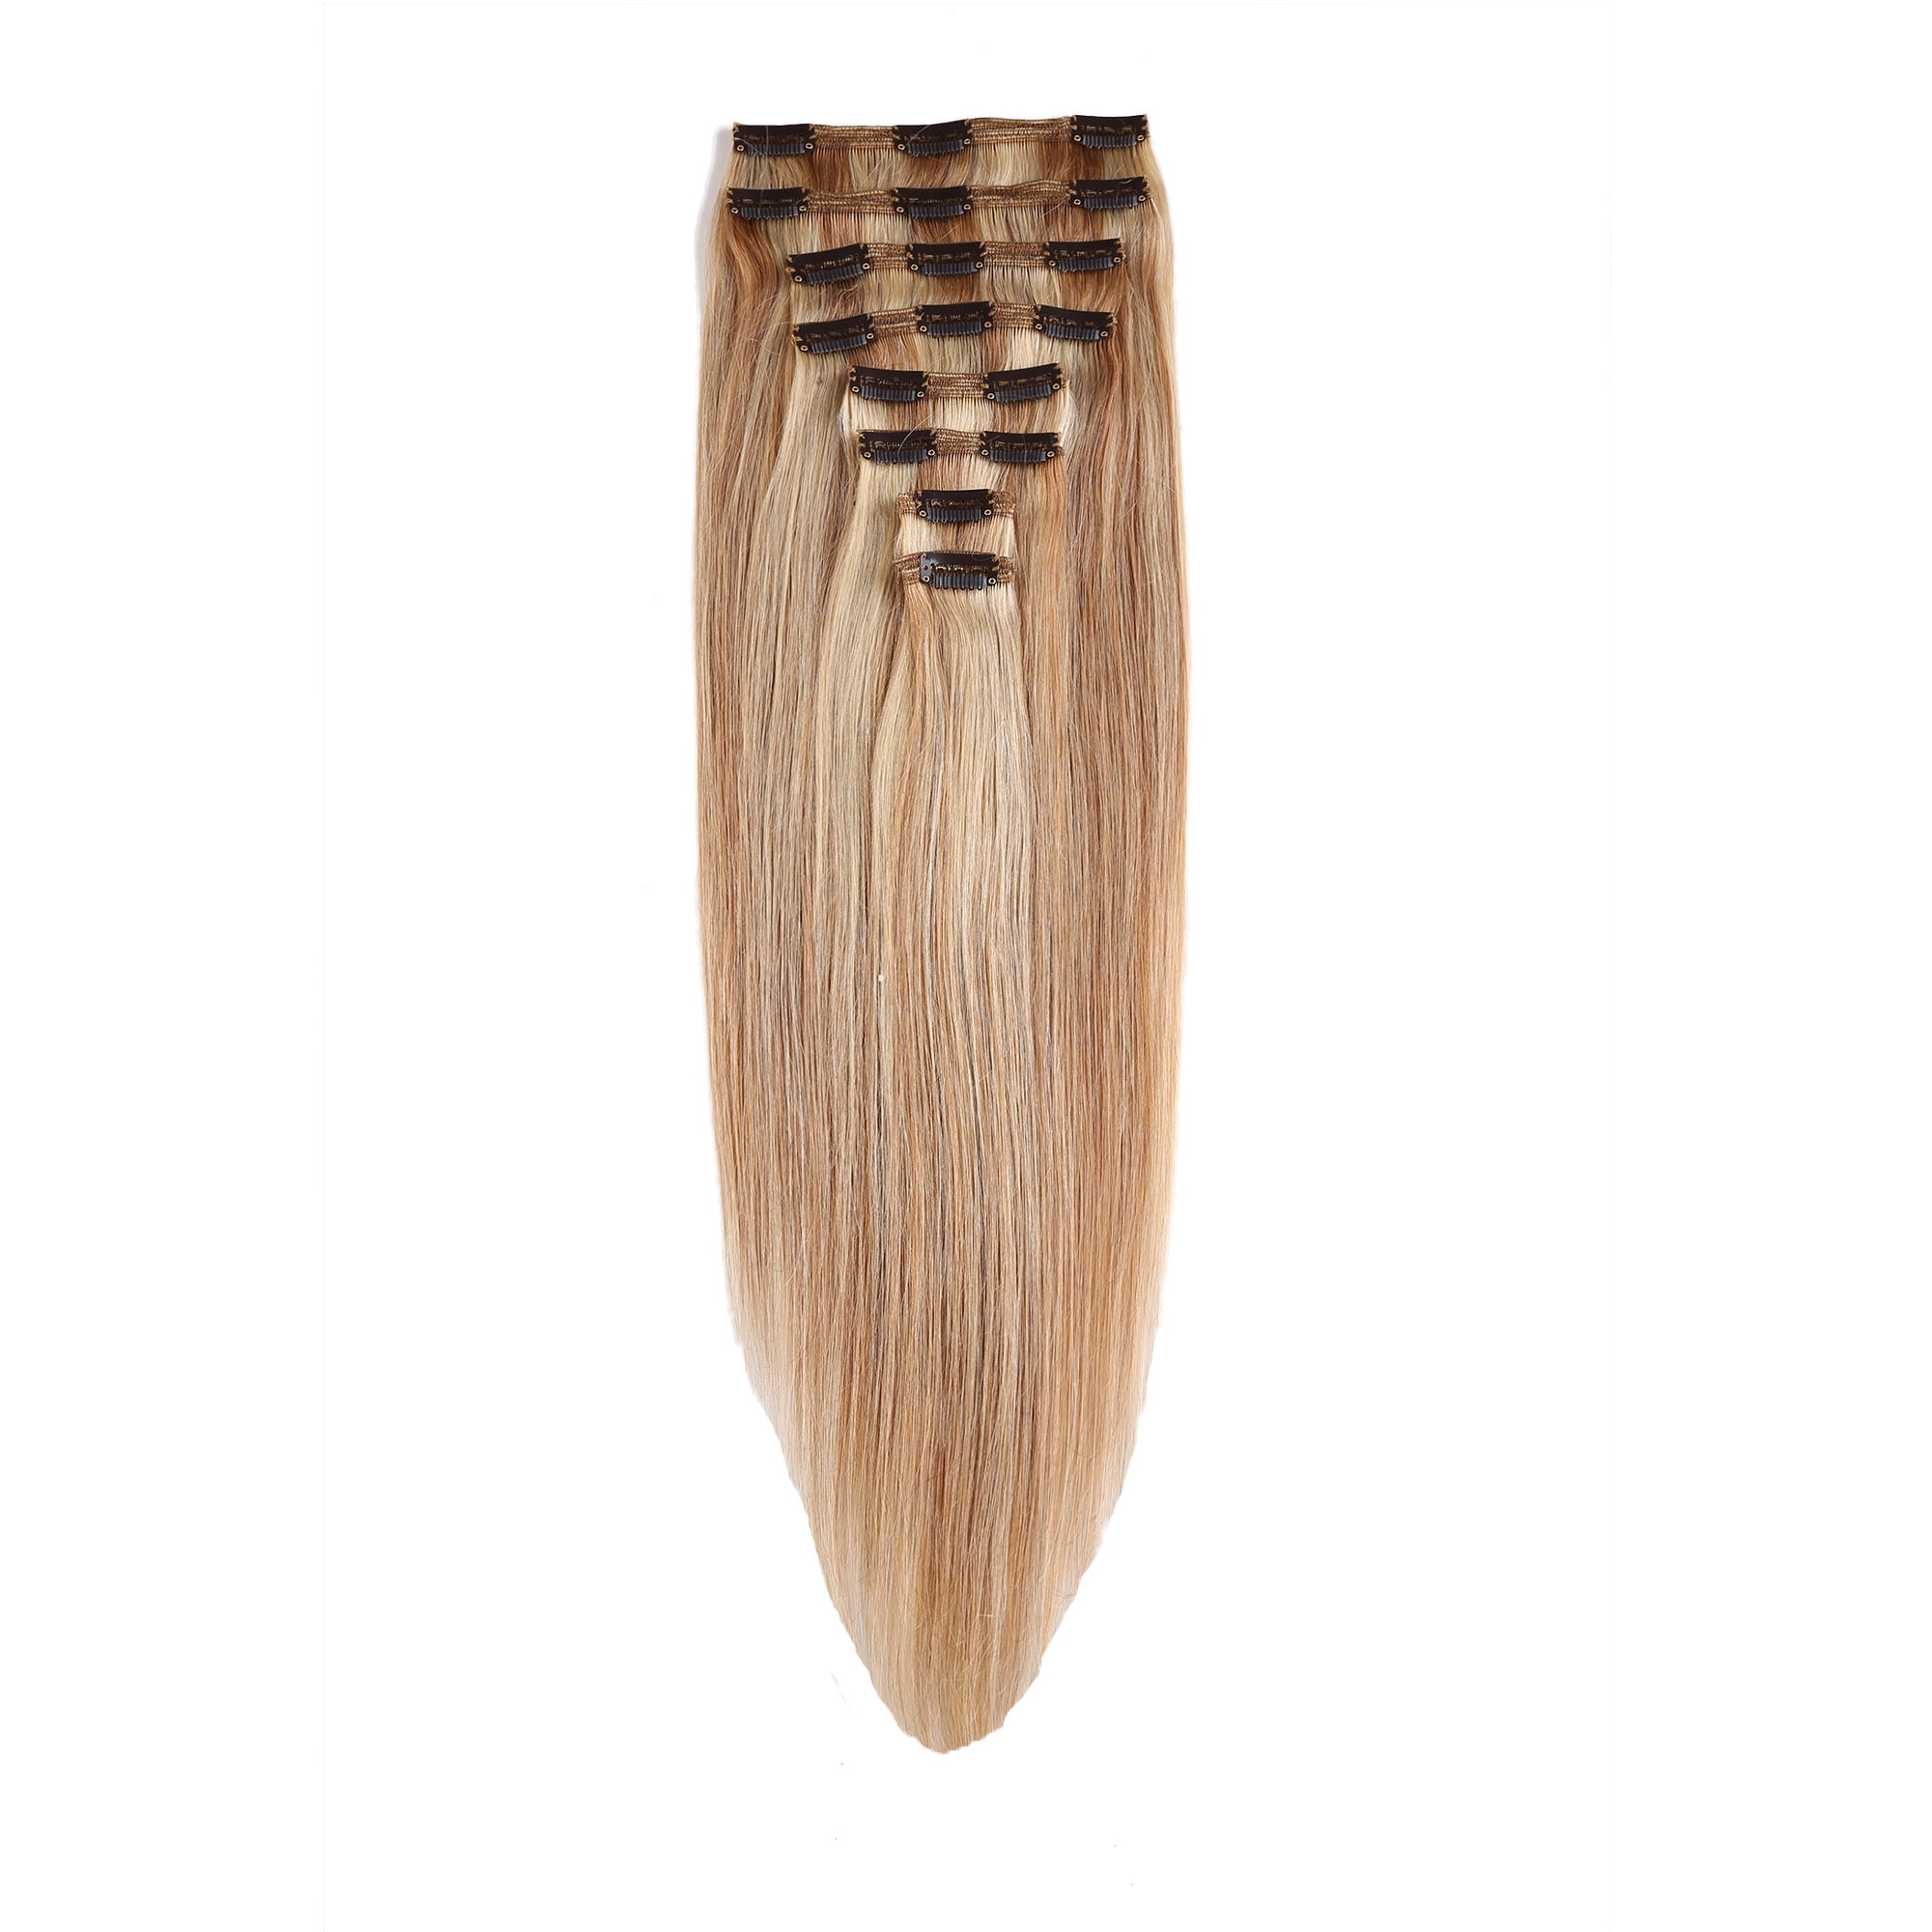 S Noilite 100 Remy Human Hair Real Thick Clip In Human Hair Extension 8 Pcs Brown Bleach Blonde 14 120g Walmart Com Walmart Com - 100 human hair tape in extensions roblox hair extensions